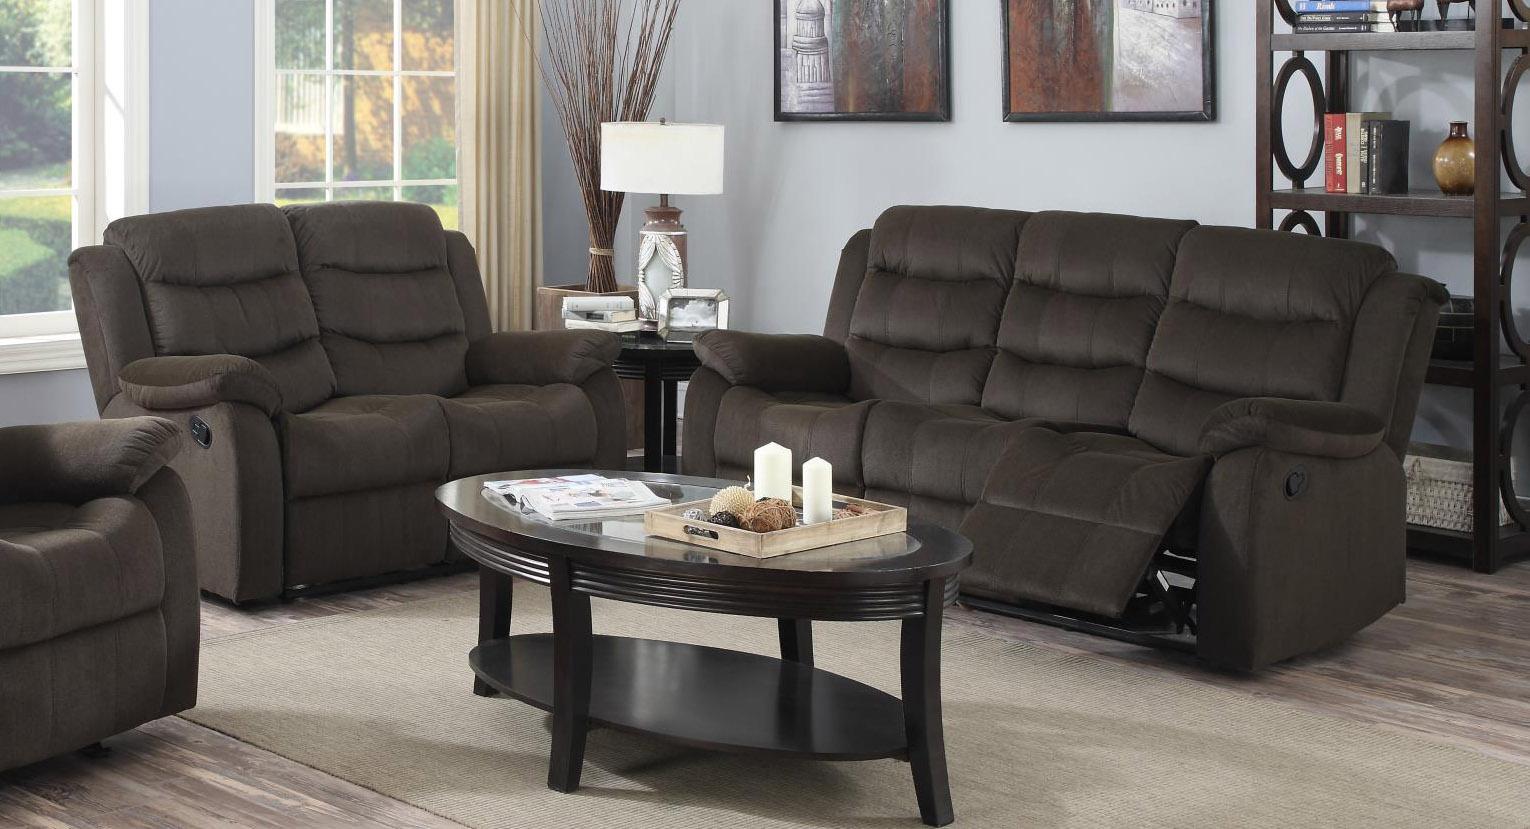 Classic, Traditional Sectional Living Room Set Candice 2005-BR-Set-2 in Brown Microfiber